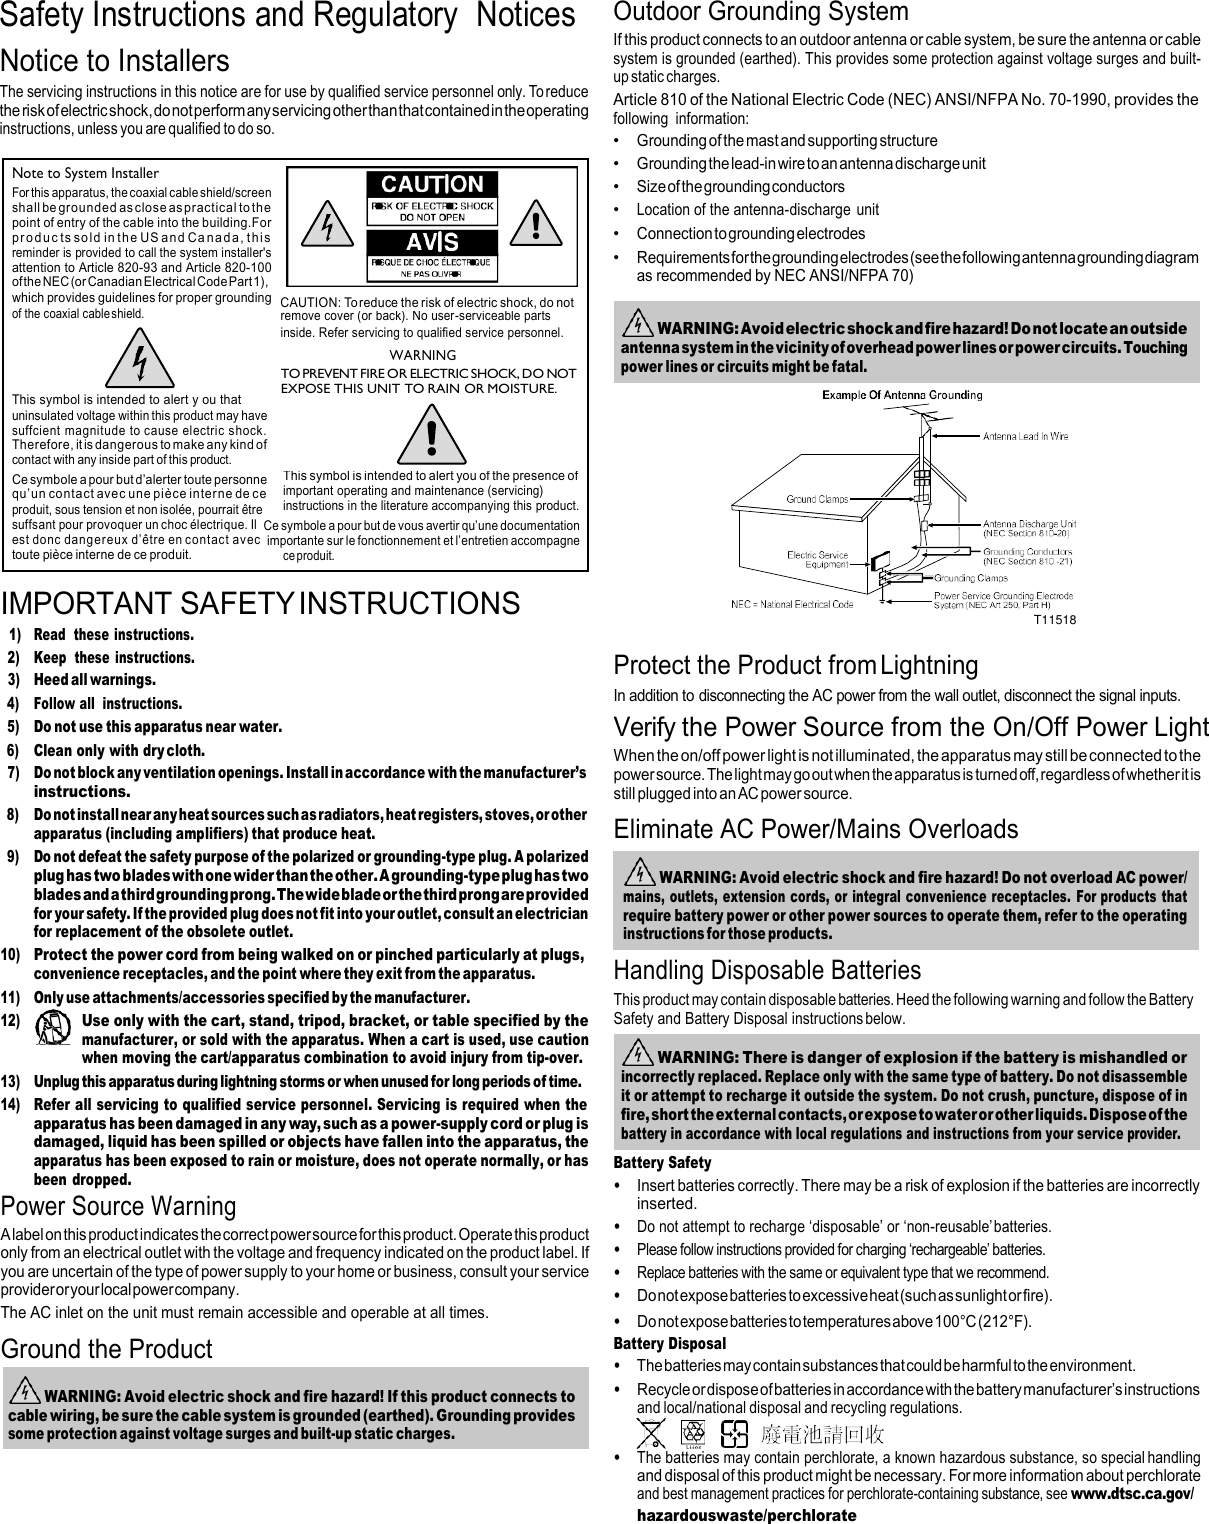 Safety Instructions and Regulatory  Notices Notice to Installers The servicing instructions in this notice are for use by qualified service personnel only. To reduce the risk of electric shock, do not perform any servicing other than that contained in the operating instructions, unless you are qualified to do so. Outdoor Grounding System If this product connects to an outdoor antenna or cable system, be sure the antenna or cable system is grounded (earthed). This provides some protection against voltage surges and built- up static charges. Article 810 of the National Electric Code (NEC) ANSI/NFPA No. 70-1990, provides the following  information: • Grounding of the mast and supporting structure • Grounding the lead-in wire to an antenna discharge unit • Size of the grounding conductors • Location of the antenna-discharge  unit • Connection to grounding electrodes • Requirements for the grounding electrodes (see the following antenna grounding diagram as recommended by NEC ANSI/NFPA 70)        IMPORTANT SAFETY INSTRUCTIONS 1) Read  these instructions. 2) Keep  these instructions. 3) Heed all warnings.  Protect the Product from Lightning  T11518 4) Follow all  instructions. 5) Do not use this apparatus near water. 6) Clean only with dry cloth. 7) Do not block any ventilation openings. Install in accordance with the manufacturer’s instructions. 8) Do not install near any heat sources such as radiators, heat registers, stoves, or other apparatus (including amplifiers) that produce heat. 9) Do not defeat the safety purpose of the polarized or grounding-type plug. A polarized plug has two blades with one wider than the other. A grounding-type plug has two blades and a third grounding prong. The wide blade or the third prong are provided for your safety. If the provided plug does not fit into your outlet, consult an electrician for replacement of the obsolete outlet. 10) Protect the power cord from being walked on or pinched particularly at plugs, convenience receptacles, and the point where they exit from the apparatus. 11) Only use attachments/accessories specified by the manufacturer. 12) Use only with the cart, stand, tripod, bracket, or table specified by the manufacturer, or sold with the apparatus. When a cart is used, use caution when moving the cart/apparatus combination to avoid injury from tip-over. 13) Unplug this apparatus during lightning storms or when unused for long periods of time. 14) Refer all servicing to qualified service personnel. Servicing is required when the apparatus has been damaged in any way, such as a power-supply cord or plug is damaged, liquid has been spilled or objects have fallen into the apparatus, the apparatus has been exposed to rain or moisture, does not operate normally, or has been dropped. Power Source Warning A label on this product indicates the correct power source for this product. Operate this product only from an electrical outlet with the voltage and frequency indicated on the product label. If you are uncertain of the type of power supply to your home or business, consult your service provider or your local power company. The AC inlet on the unit must remain accessible and operable at all times. Ground the Product In addition to disconnecting the AC power from the wall outlet, disconnect the signal inputs. Verify the Power Source from the On/Off Power Light When the on/off power light is not illuminated, the apparatus may still be connected to the power source. The light may go out when the apparatus is turned off, regardless of whether it is still plugged into an AC power source. Eliminate AC Power/Mains Overloads  Handling Disposable Batteries This product may contain disposable batteries. Heed the following warning and follow the Battery Safety and Battery Disposal instructions below.   Battery Safety • Insert batteries correctly. There may be a risk of explosion if the batteries are incorrectly inserted. • Do not attempt to recharge ‘disposable’ or ‘non-reusable’ batteries. • Please follow instructions provided for charging ‘rechargeable’ batteries. • Replace batteries with the same or equivalent type that we recommend. • Do not expose batteries to excessive heat (such as sunlight or fire). • Do not expose batteries to temperatures above 100°C (212°F). Battery Disposal • The batteries may contain substances that could be harmful to the environment. • Recycle or dispose of batteries in accordance with the battery manufacturer’s instructions and local/national disposal and recycling regulations.       • The batteries may contain perchlorate, a known hazardous substance, so special handling and disposal of this product might be necessary. For more information about perchlorate and best management practices for perchlorate-containing substance, see www.dtsc.ca.gov/ hazardouswaste/perchlorate  WARNING: There is danger of explosion if the battery is mishandled or incorrectly replaced. Replace only with the same type of battery. Do not disassemble it or attempt to recharge it outside the system. Do not crush, puncture, dispose of in fire, short the external contacts, or expose to water or other liquids. Dispose of the battery in accordance with local regulations and instructions from your service provider.  WARNING: Avoid electric shock and fire hazard! Do not overload AC power/ mains, outlets, extension cords, or integral convenience receptacles.  For products that require battery power or other power sources to operate them, refer to the operating instructions for those products.  WARNING: Avoid electric shock and fire hazard! Do not locate an outside antenna system in the vicinity of overhead power lines or power circuits. Touching power lines or circuits might be fatal.  WARNING: Avoid electric shock and fire hazard! If this product connects to cable wiring, be sure the cable system is grounded (earthed). Grounding provides some protection against voltage surges and built-up static charges. Note to System Installer For this apparatus, the coaxial cable shield/screen shall be grounded as close as practical to the point of entry of the cable into the building.For produc ts so ld  in th e  US and Ca na d a , th is reminder is provided to call the system installer&apos;s attention to Article 820-93 and Article 820-100 of the NEC (or Canadian Electrical Code Part 1), which provides guidelines for proper grounding  CAUTION: To reduce the risk of electric shock, do not of the coaxial cable shield. remove cover (or back). No user-serviceable parts inside. Refer servicing to qualified service personnel. WARNING TO PREVENT FIRE OR ELECTRIC SHOCK, DO NOT EXPOSE THIS UNIT TO RAIN OR MOISTURE. This symbol is intended to alert y ou that  uninsulated voltage within this product may have suffcient magnitude to cause electric shock. Therefore, it is dangerous to make any kind of contact with any inside part of this product. Ce symbole a pour but d’alerter toute personne qu’un contact avec une pièce interne de ce  produit, sous tension et non isolée, pourrait être This symbol is intended to alert you of the presence of important operating and maintenance (servicing) instructions in the literature accompanying this product. suffsant pour provoquer un choc électrique. Il Ce symbole a pour but de vous avertir qu’une documentation est donc dangereux  d’être en contact avec  importante sur le fonctionnement et l’entretien accompagne toute pièce interne de ce produit. ce produit. 